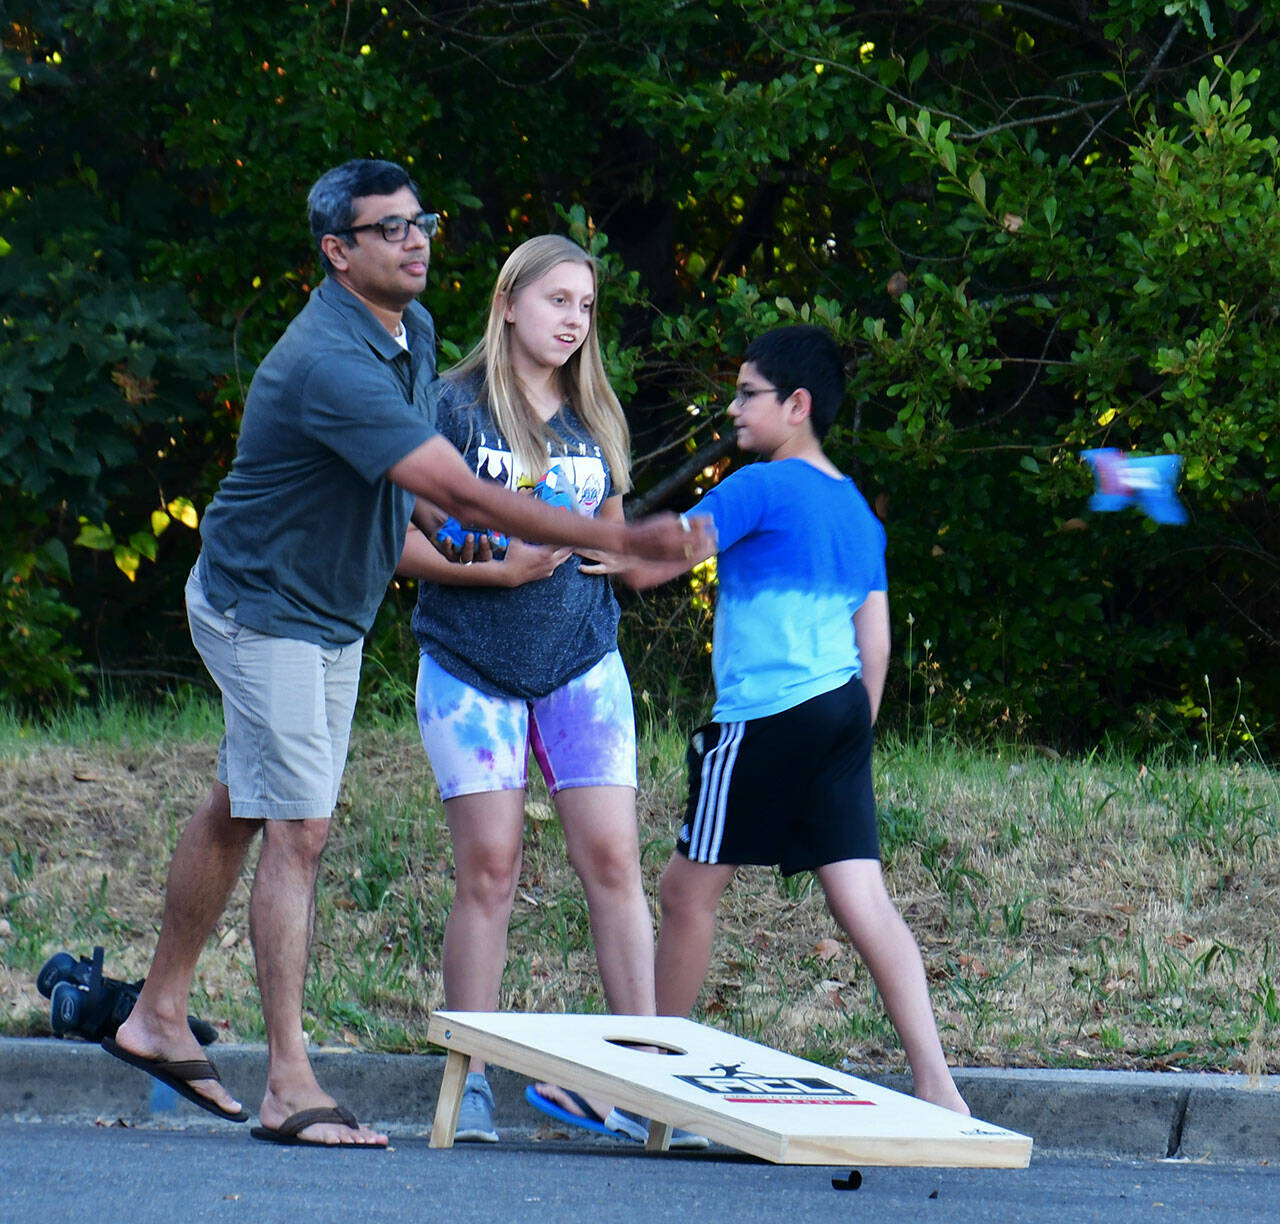 A local resident makes a toss playing cornhole on Aug. 2. Photo by Bruce Honda